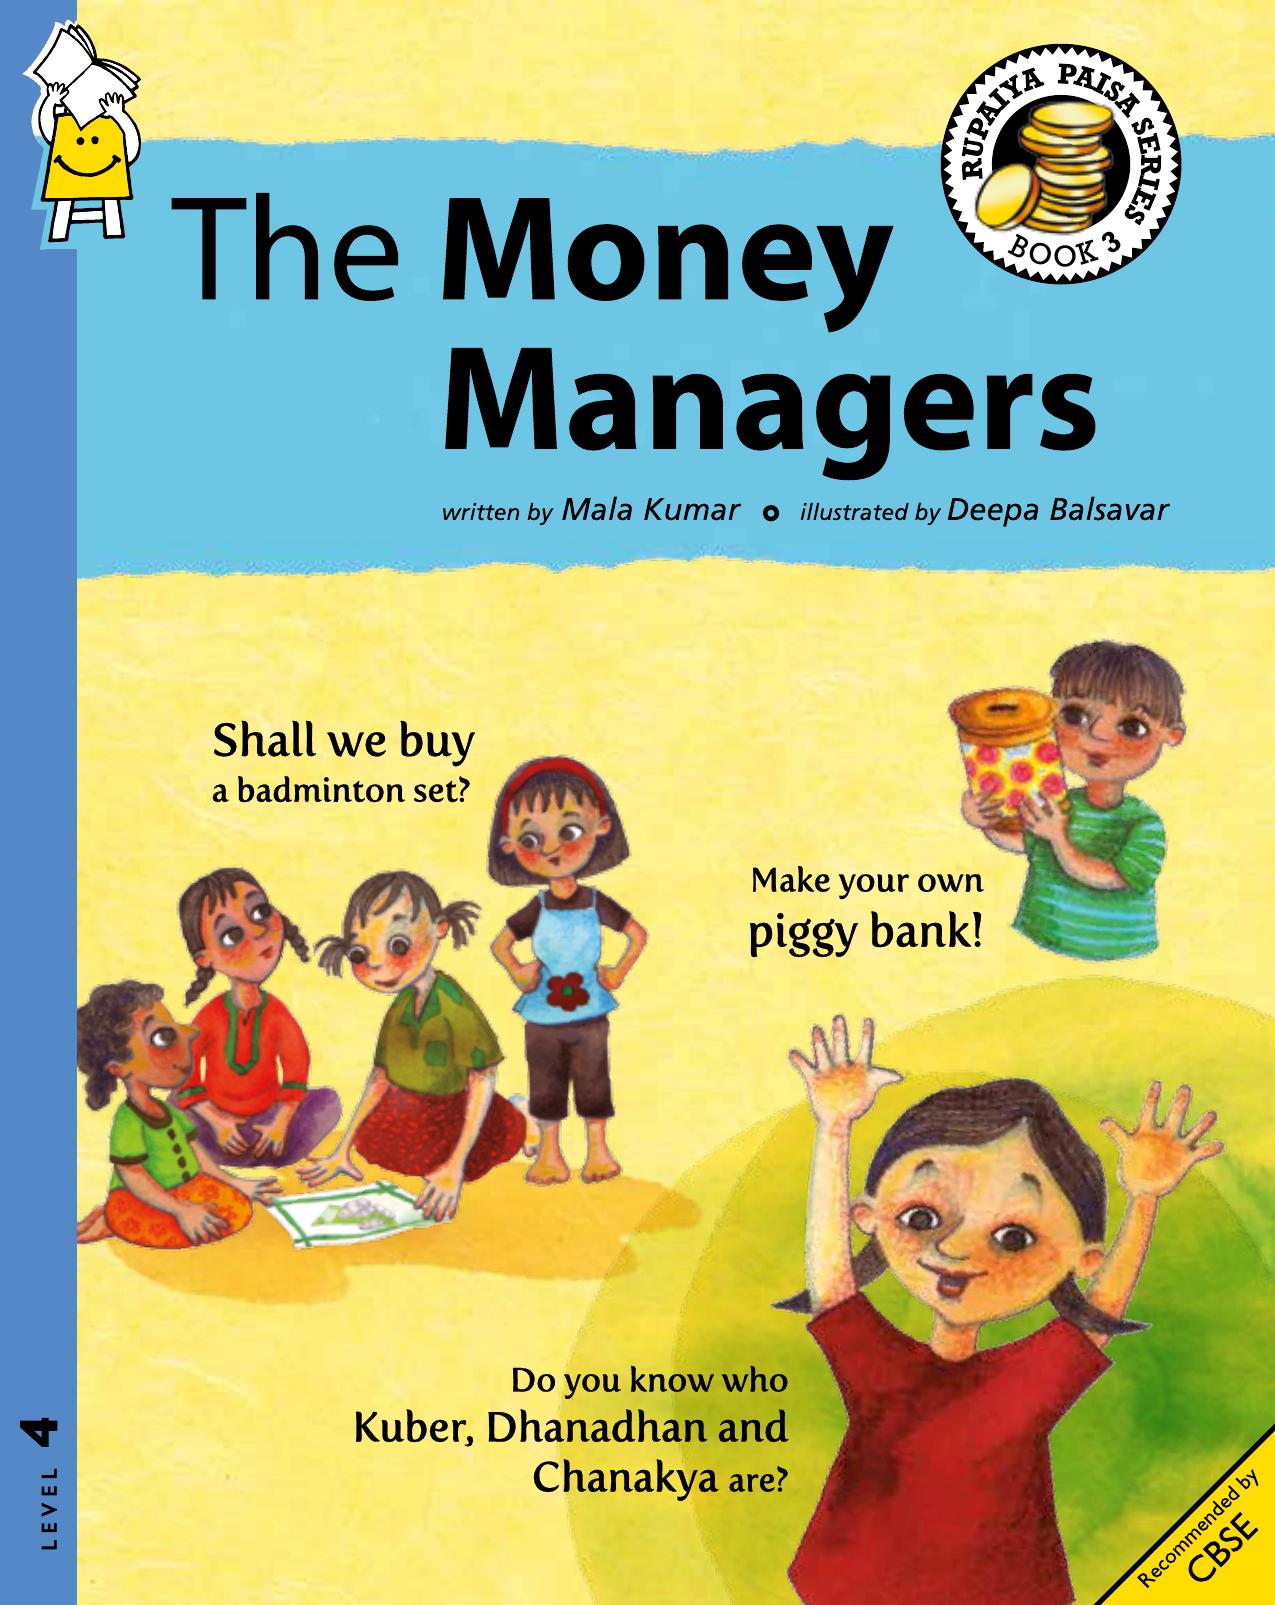 The Money Managers